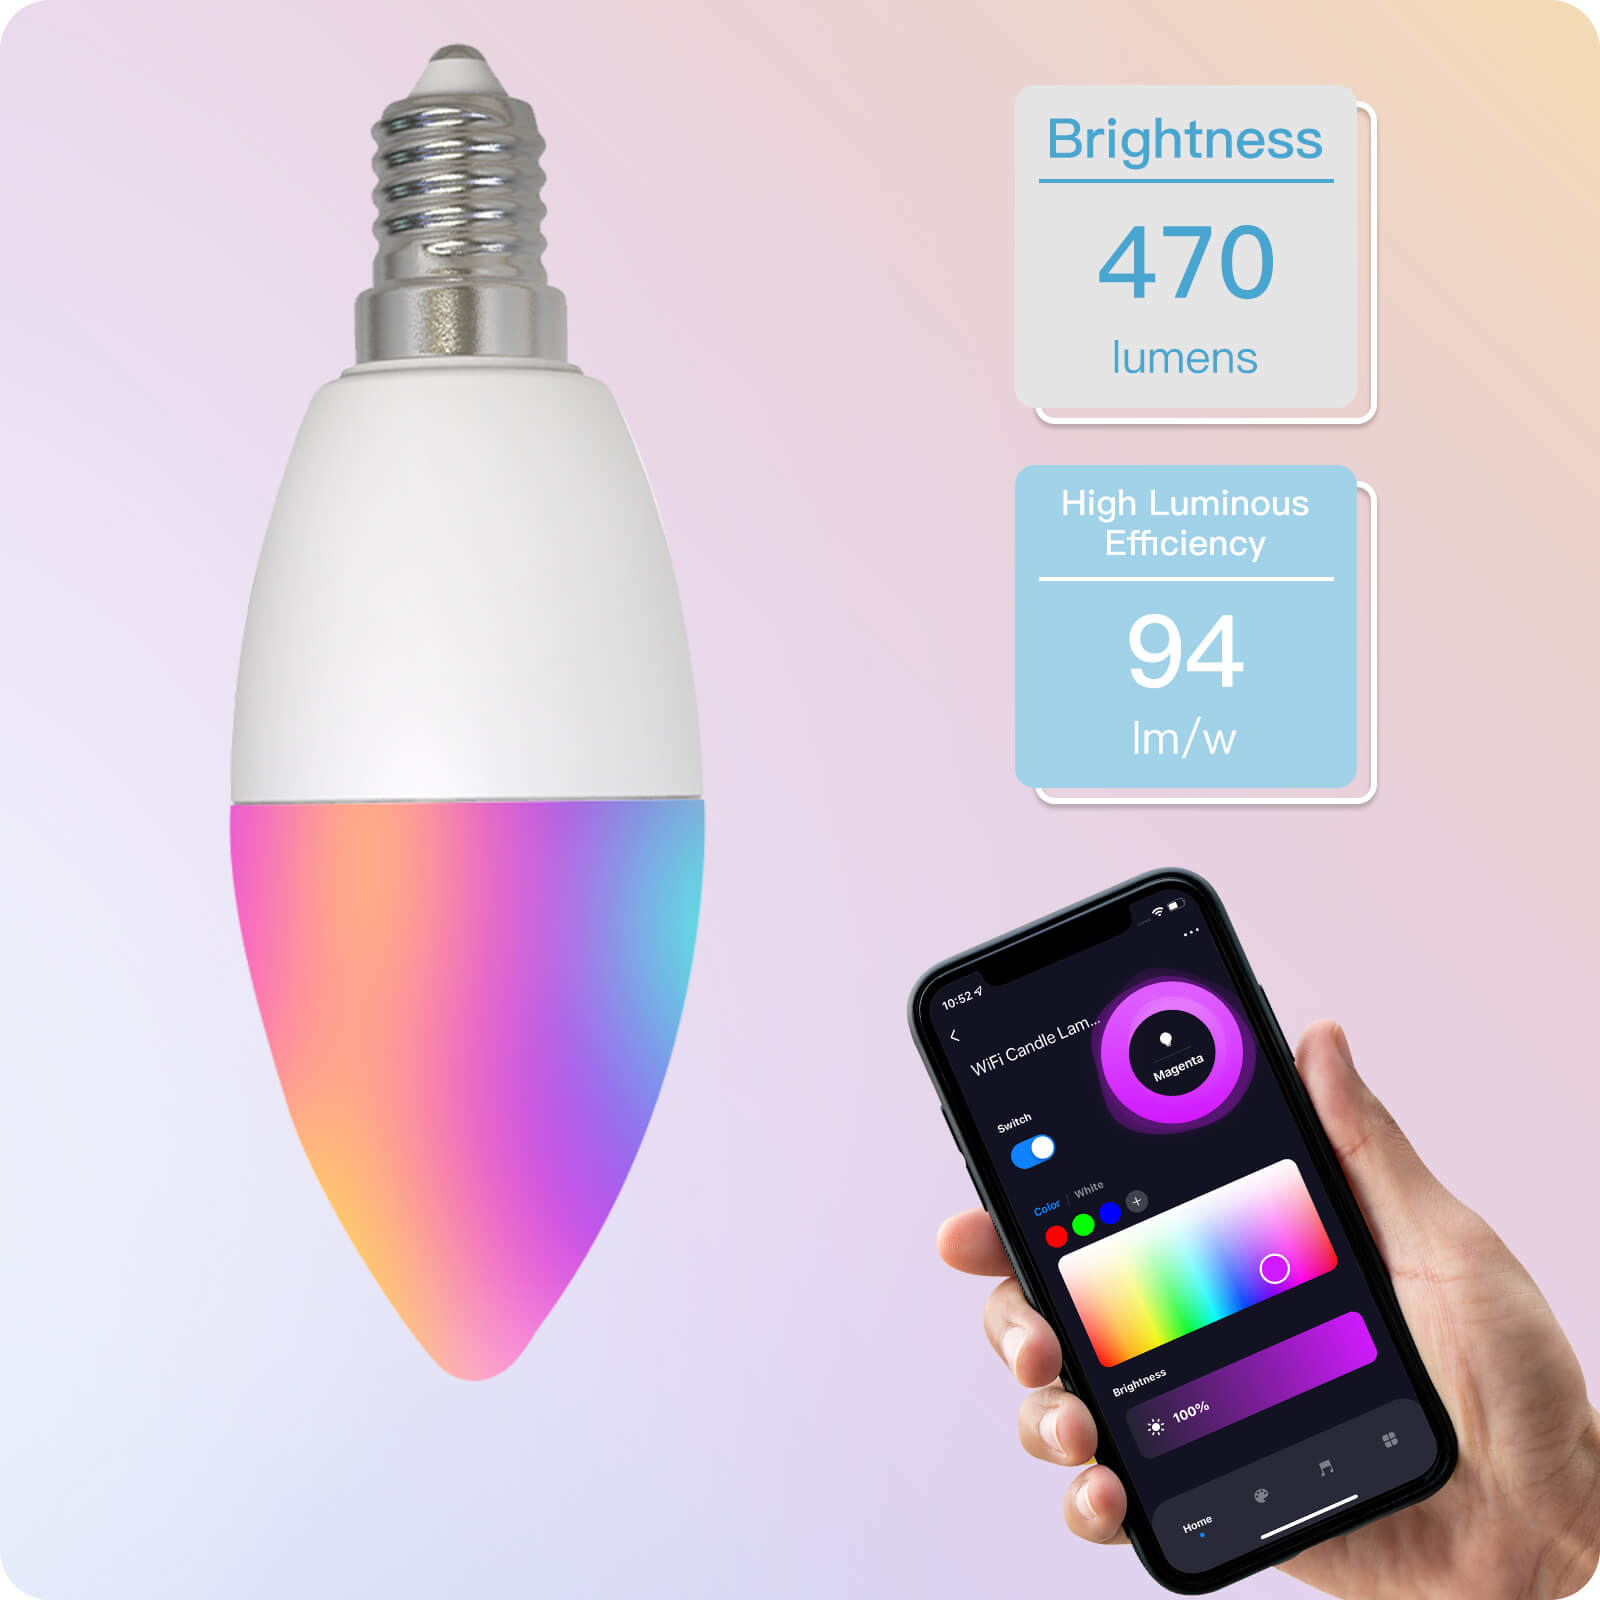 MOES WiFi Smart Candle LED LightBest Colored Dimmable Smart Bulbs